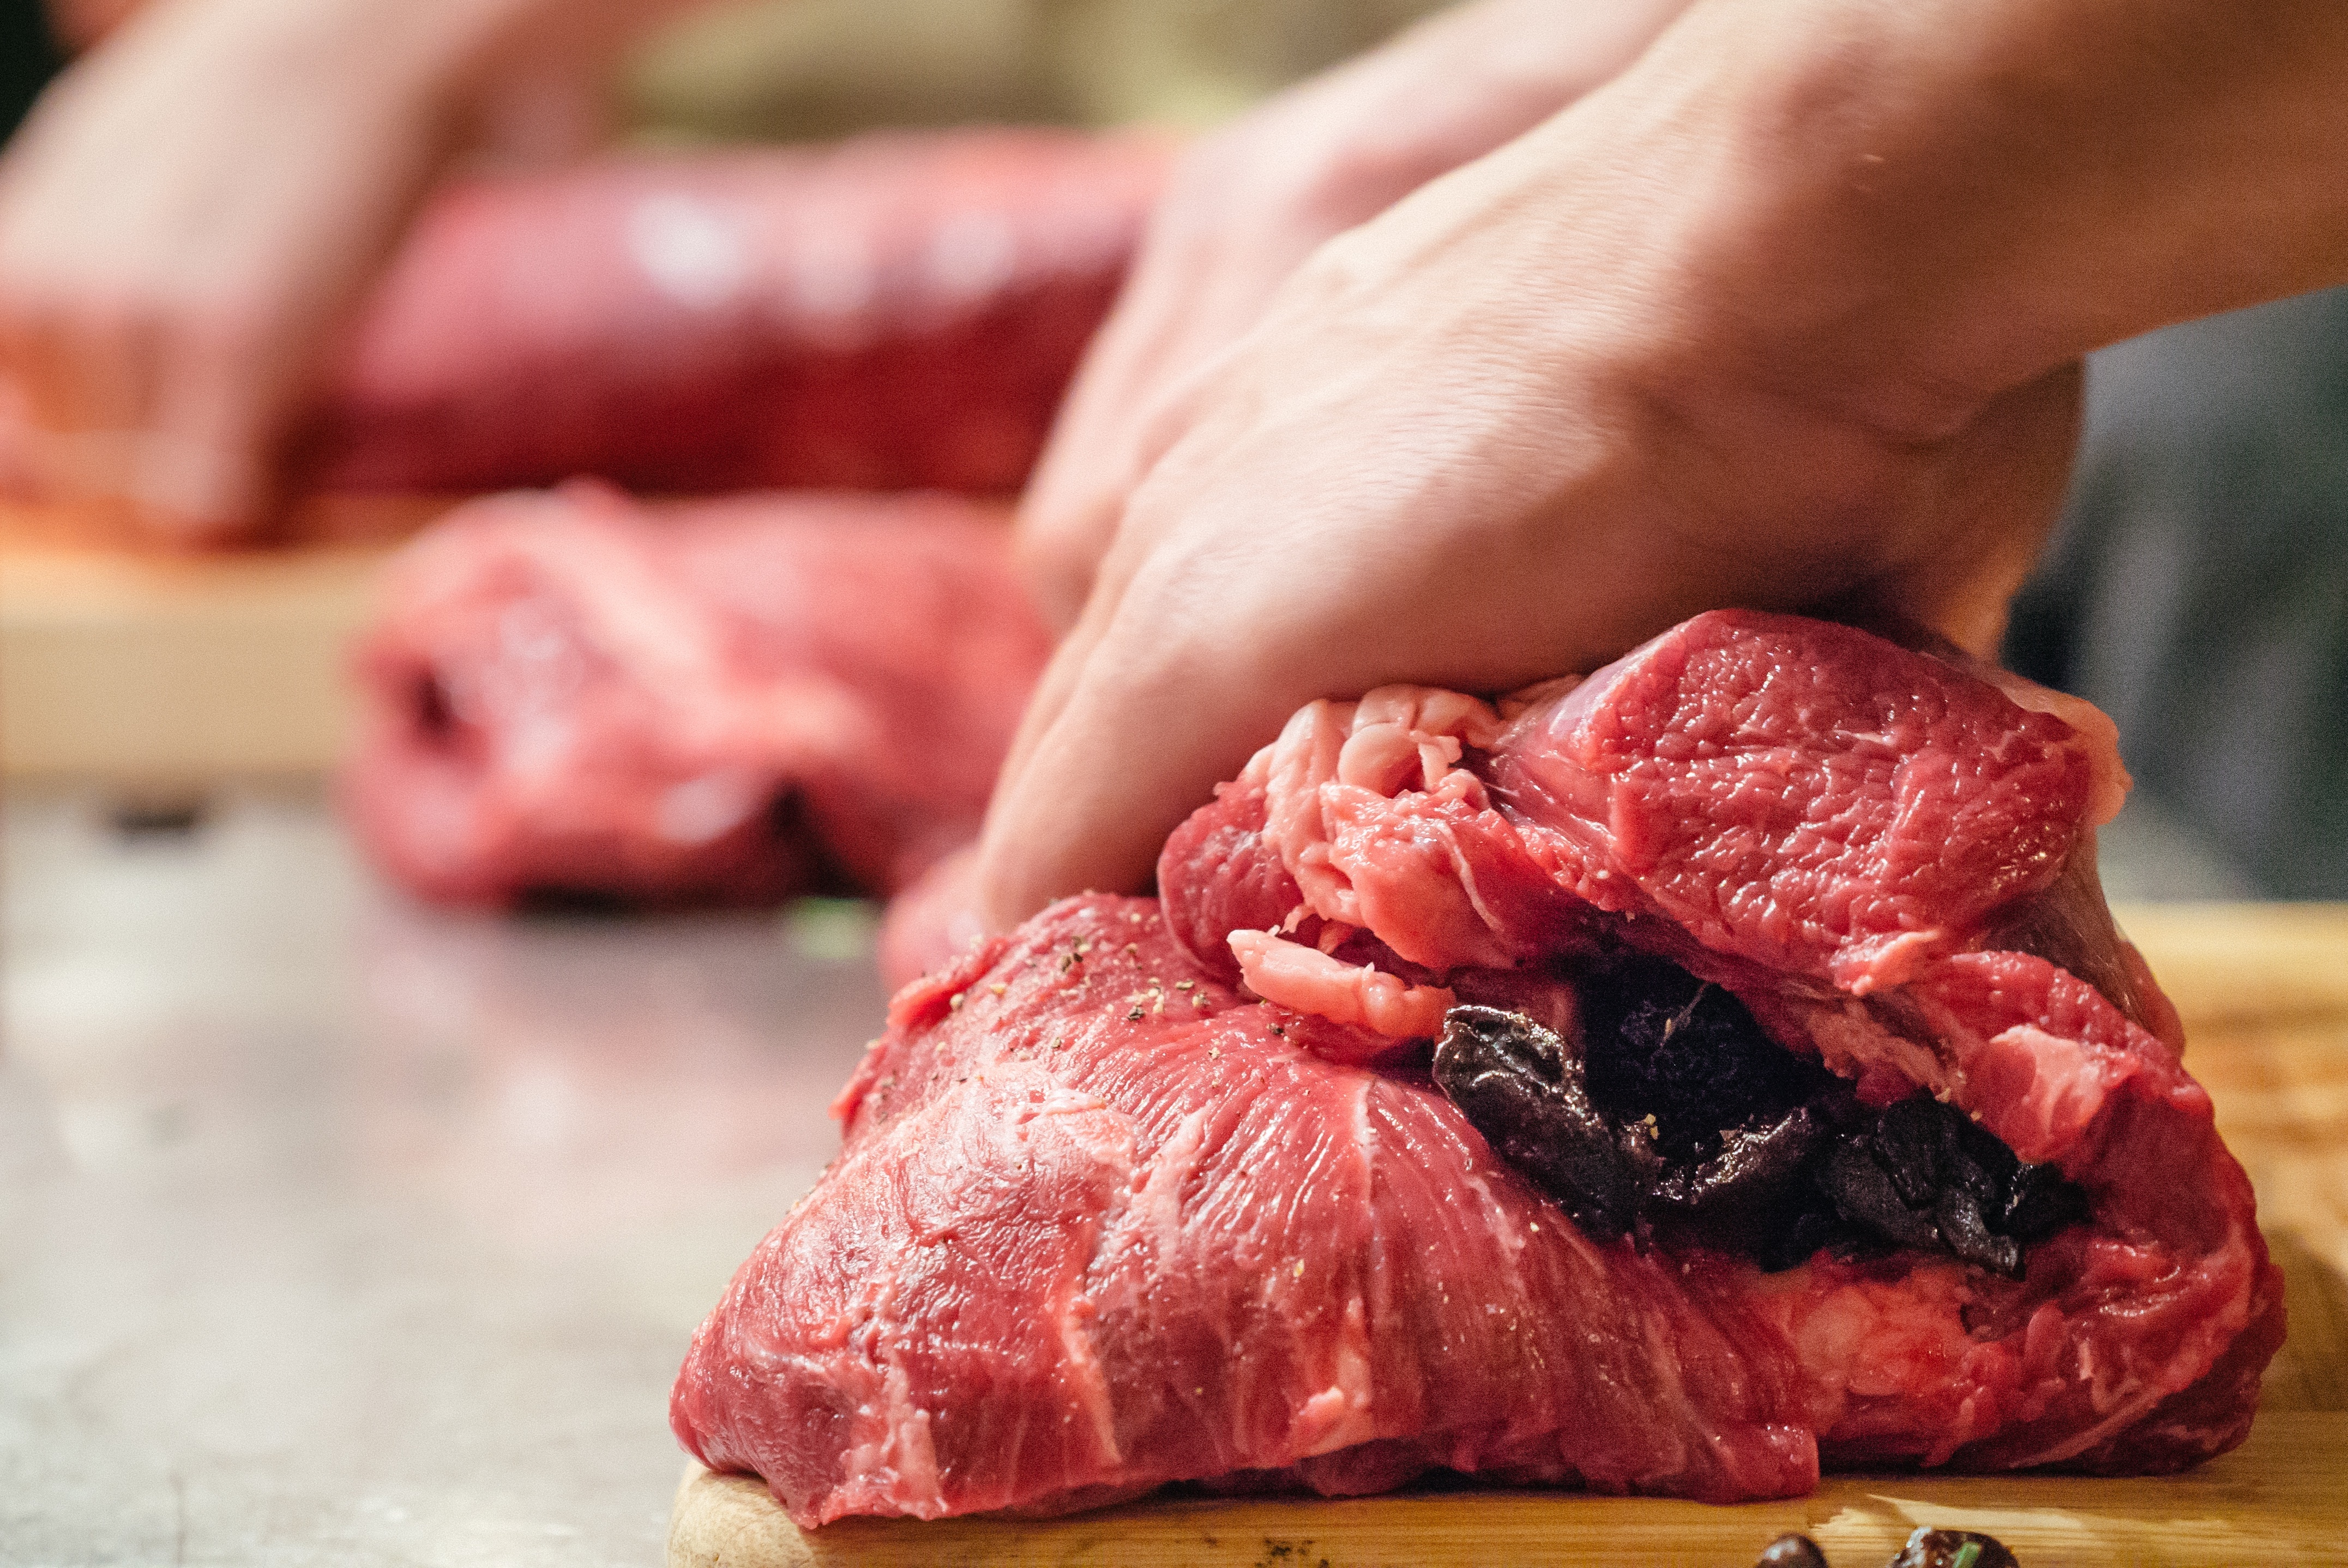 New System Ranks Evidence for Health Risks of Eating Red Meat, Smoking, and  More--But Critics Say It's Overly Simplistic